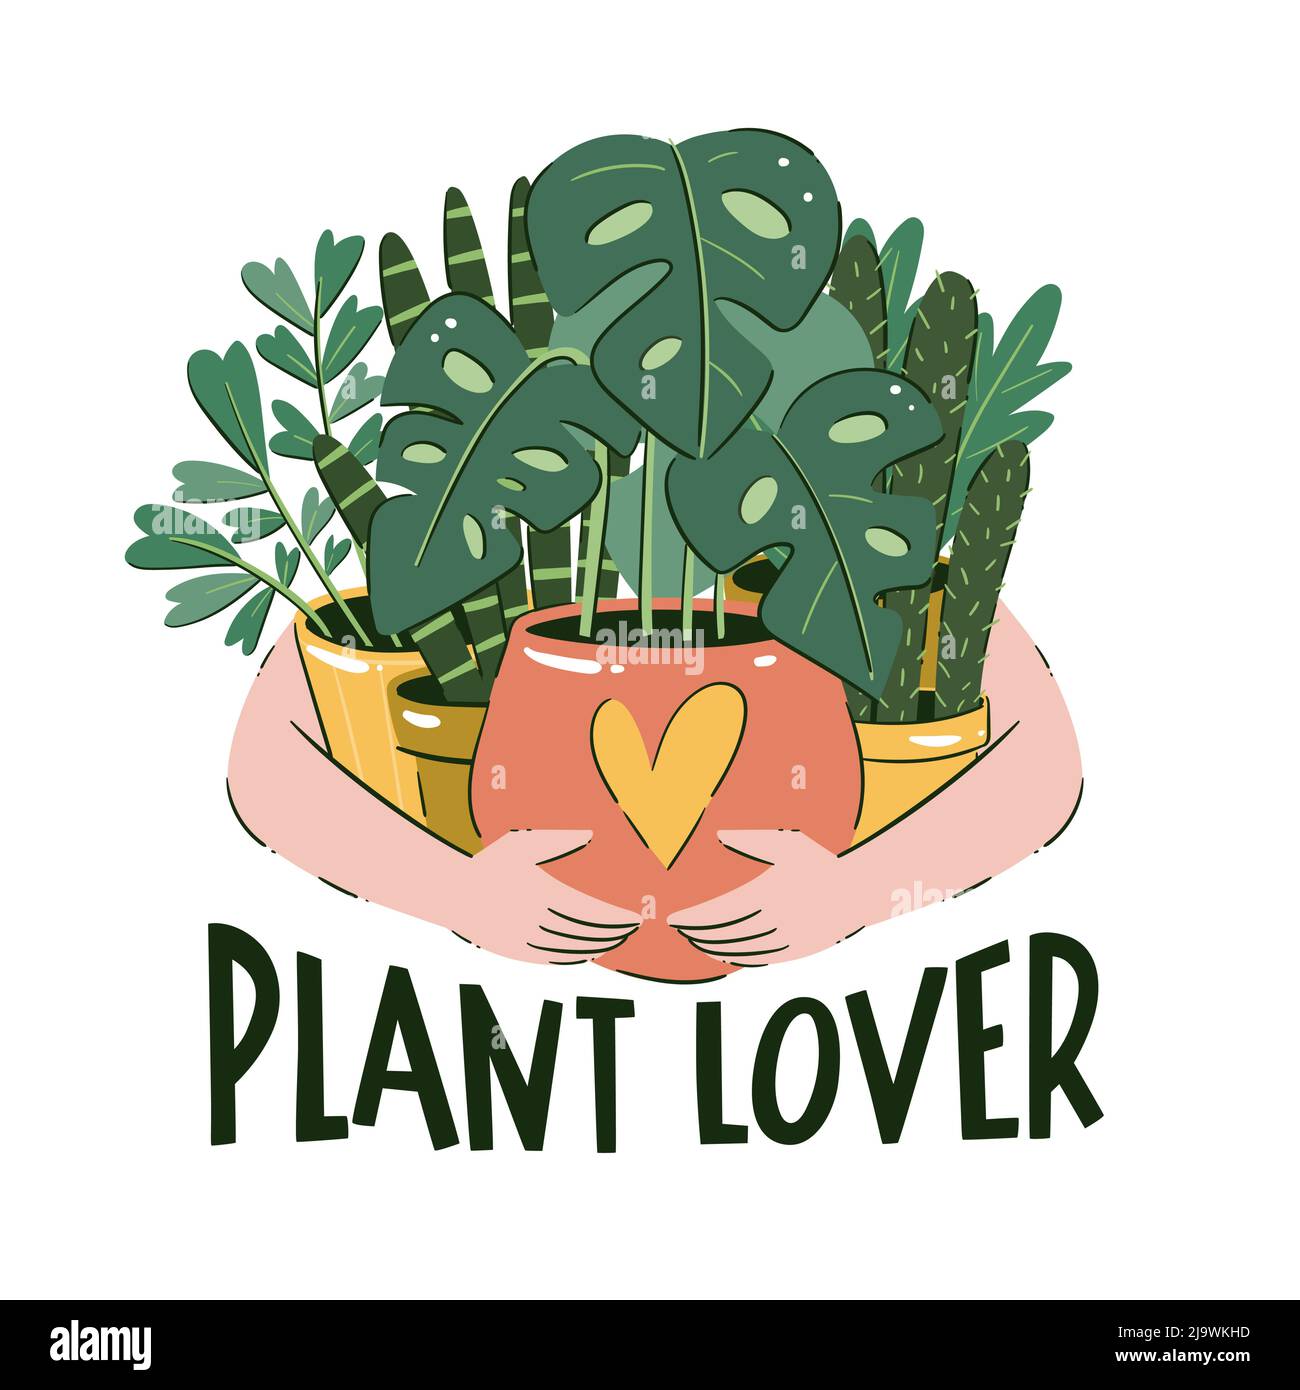 Plant lover concept. Someone is holding a bunch of house plants in their pots. Hand-drawn vector illustration. Stock Vector